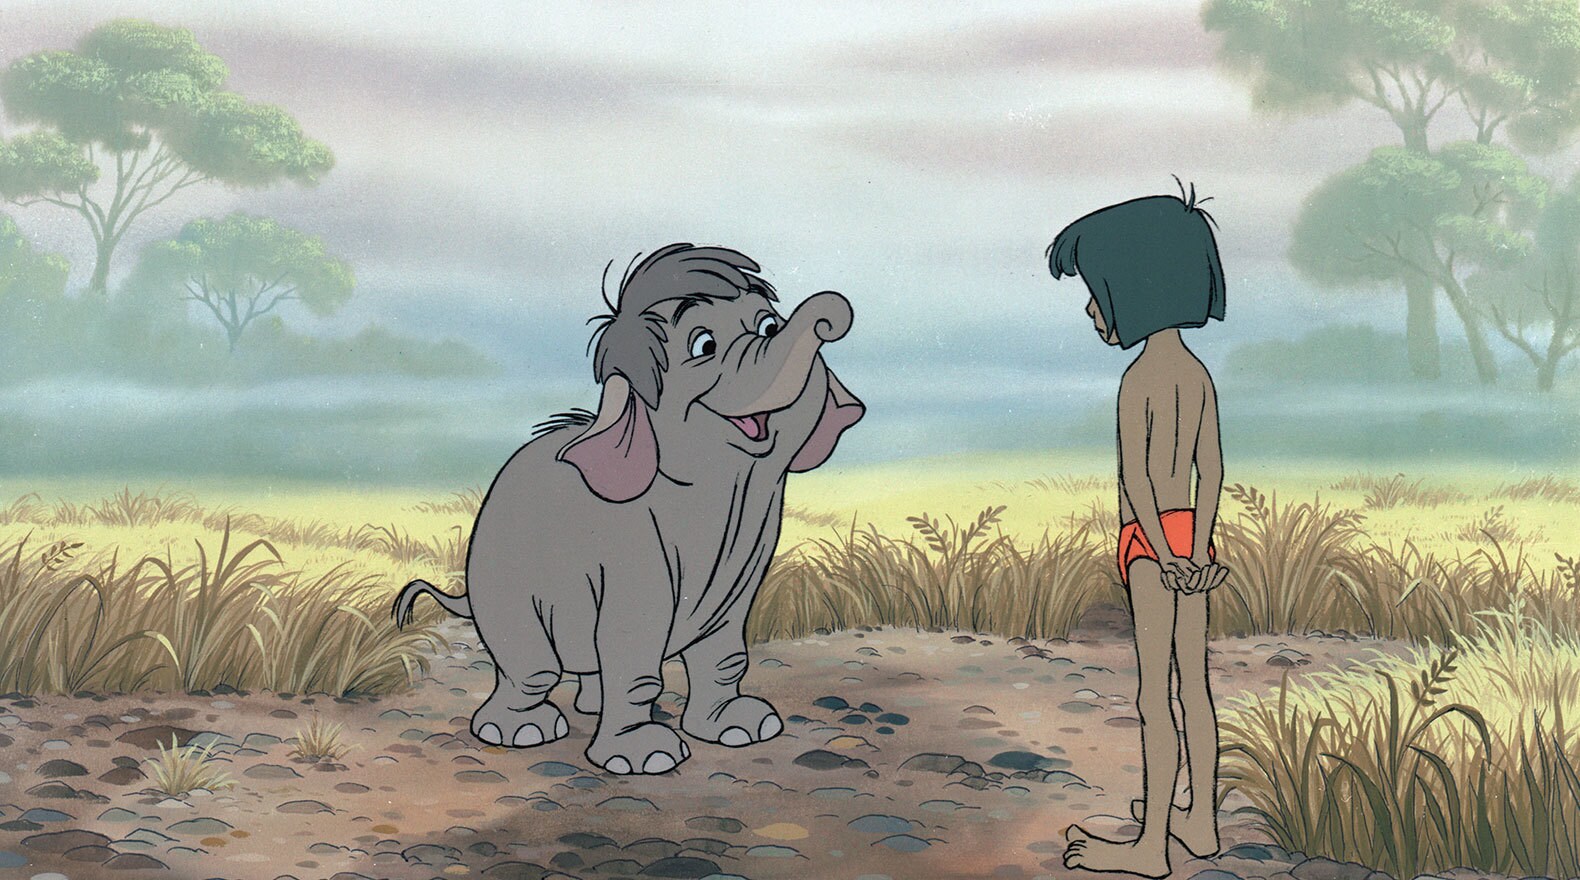 "Just do what I do, but don't talk in ranks. It's against regulations." Elephant (voice of Clint Howard) and Mowgli (voice of Bruce Reitherman) from the Disney movie The Jungle Book (1967).